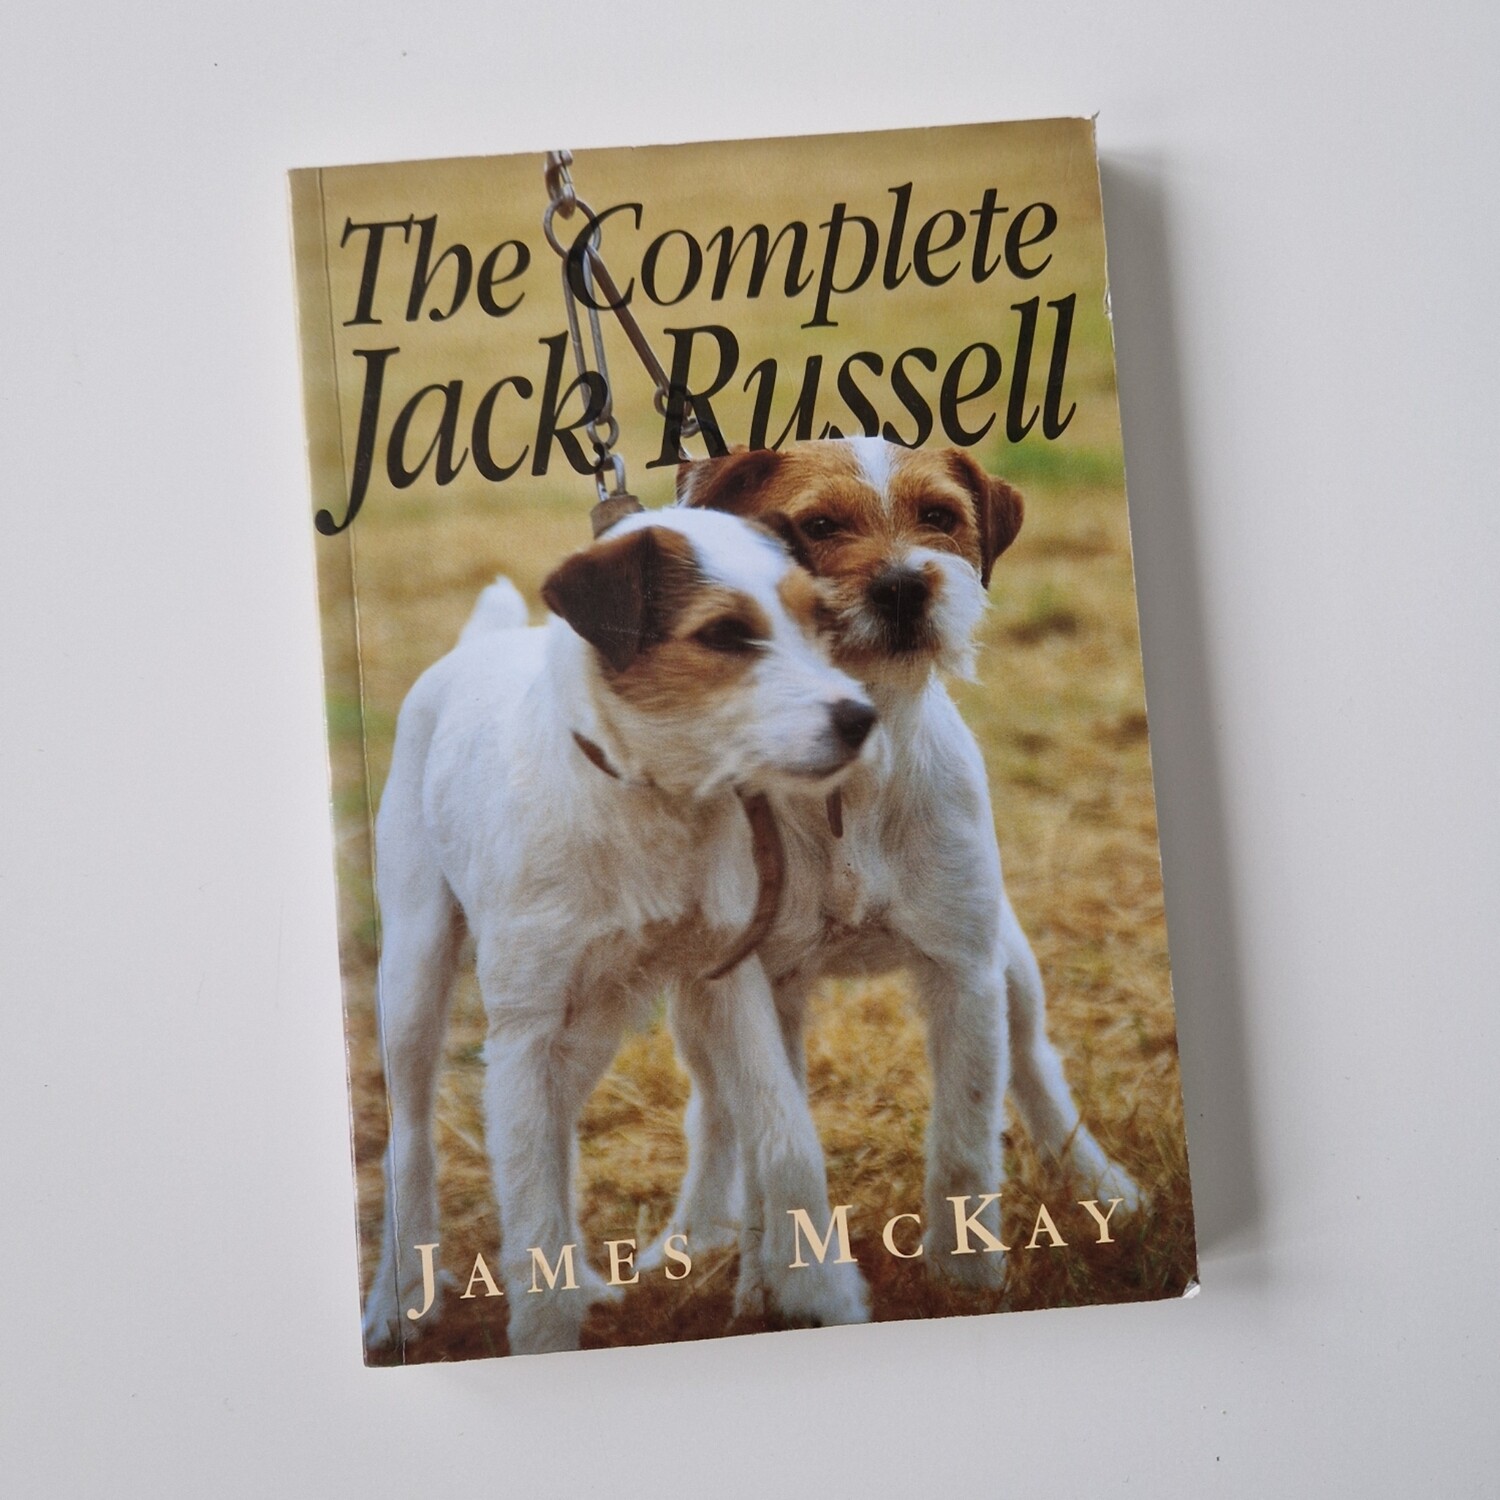 The Complete Jack Russell Notebook made from a paperback book, dog